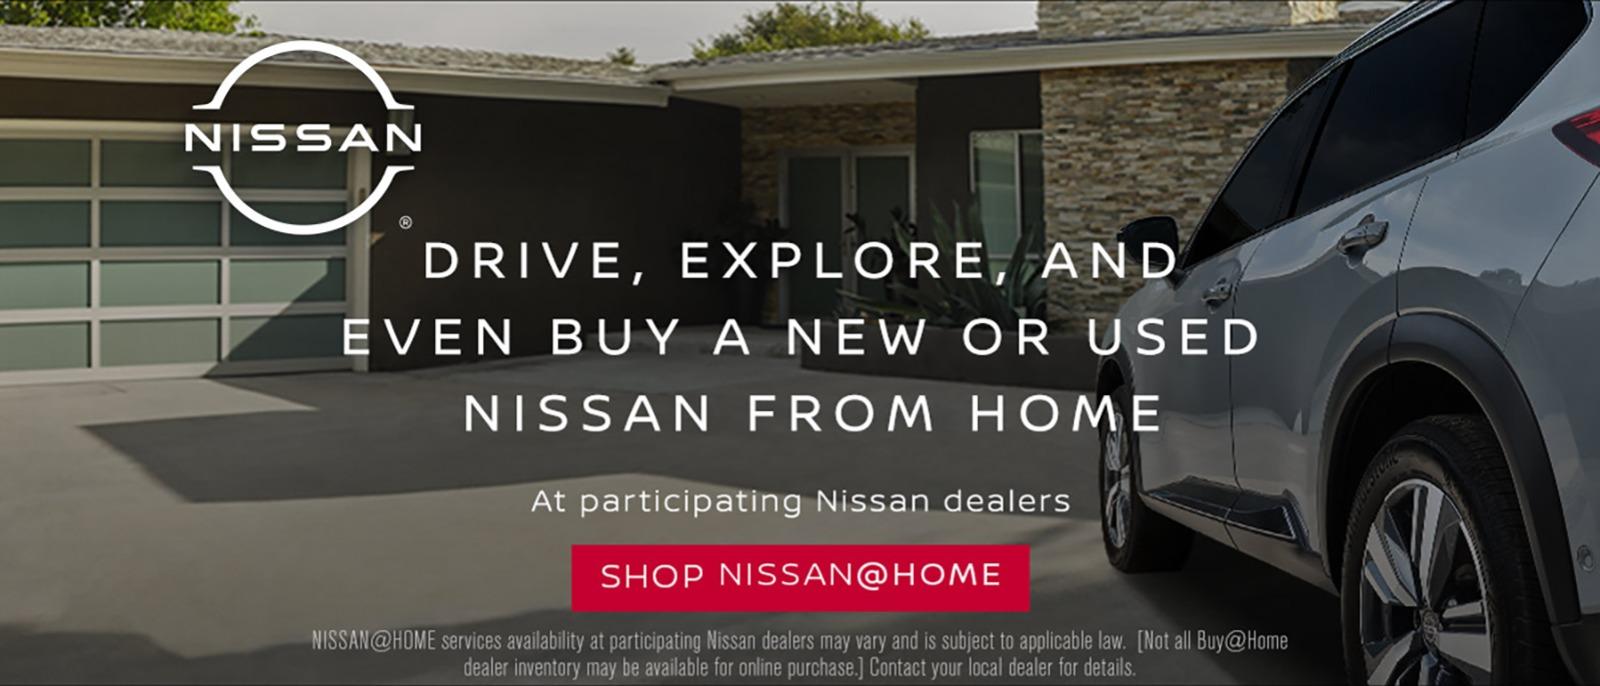 Buy Your New Car From Home.
Delivered direct, from dealer to driveway.
Shop Nissan@Home